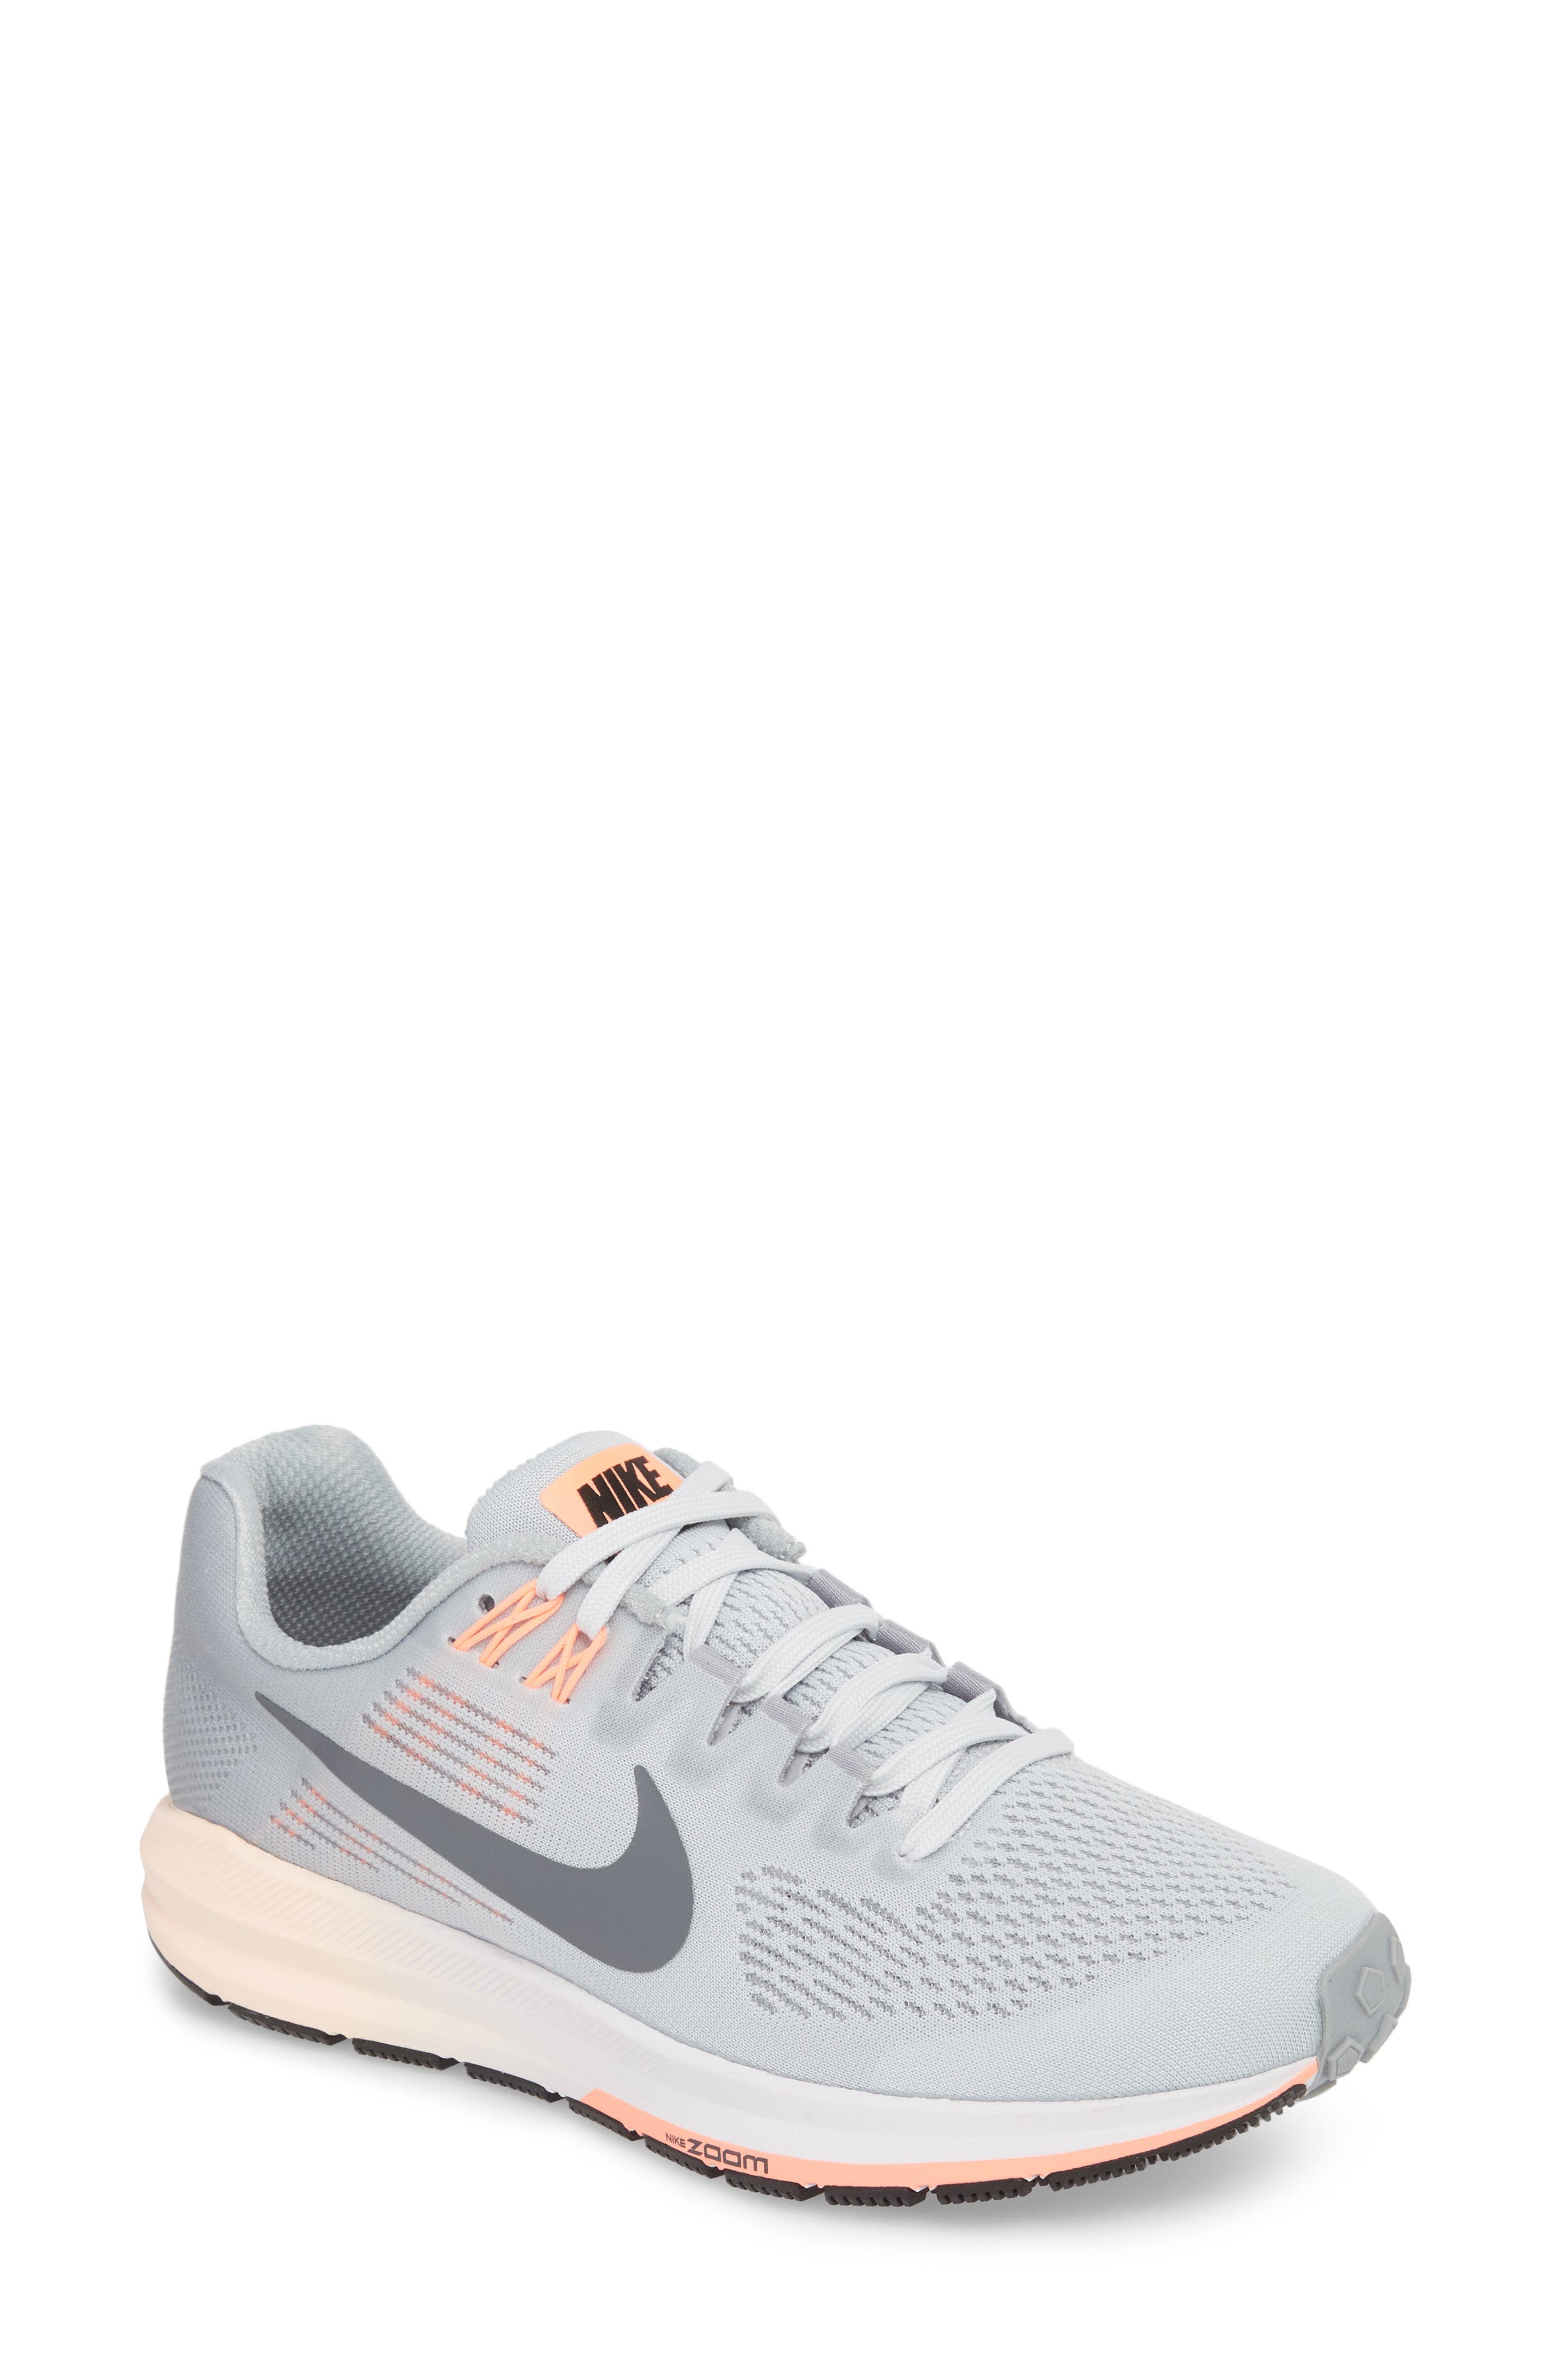 nike zoom structure women's